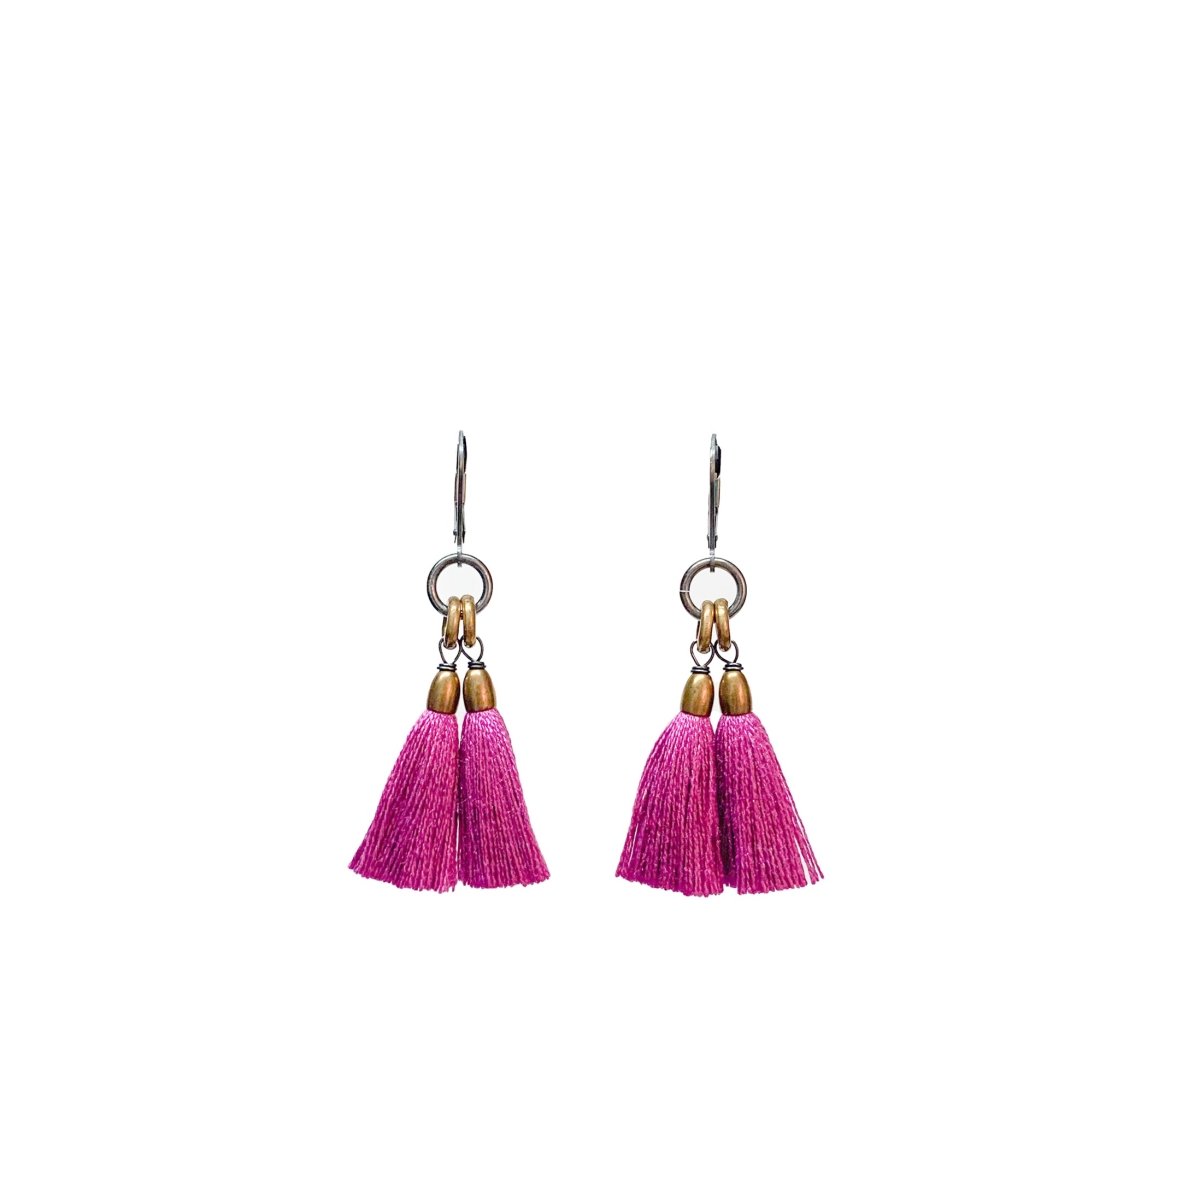 A pair of dangling earrings with fuchsia tassels and brass rings topped with a silver leverback. The Fan Earrings in Hot Violet are from Portland designer Emily Bixler of BOET.